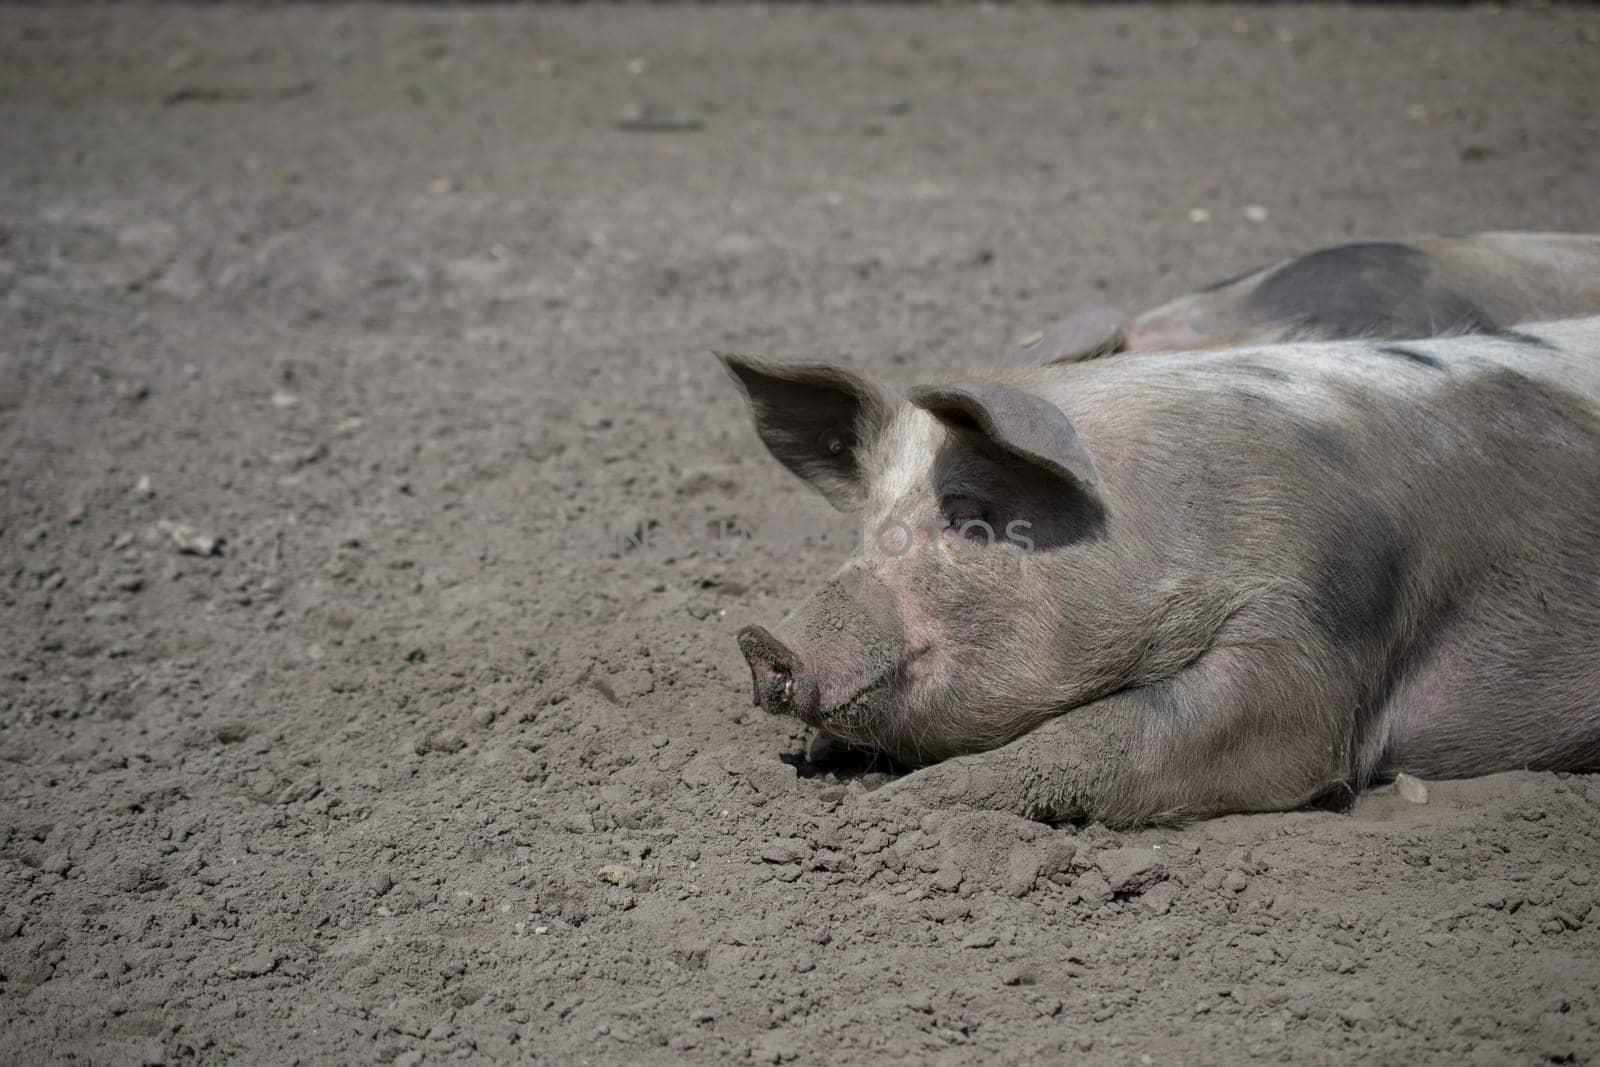 Domestic pig wallowing in the mud by Maksym